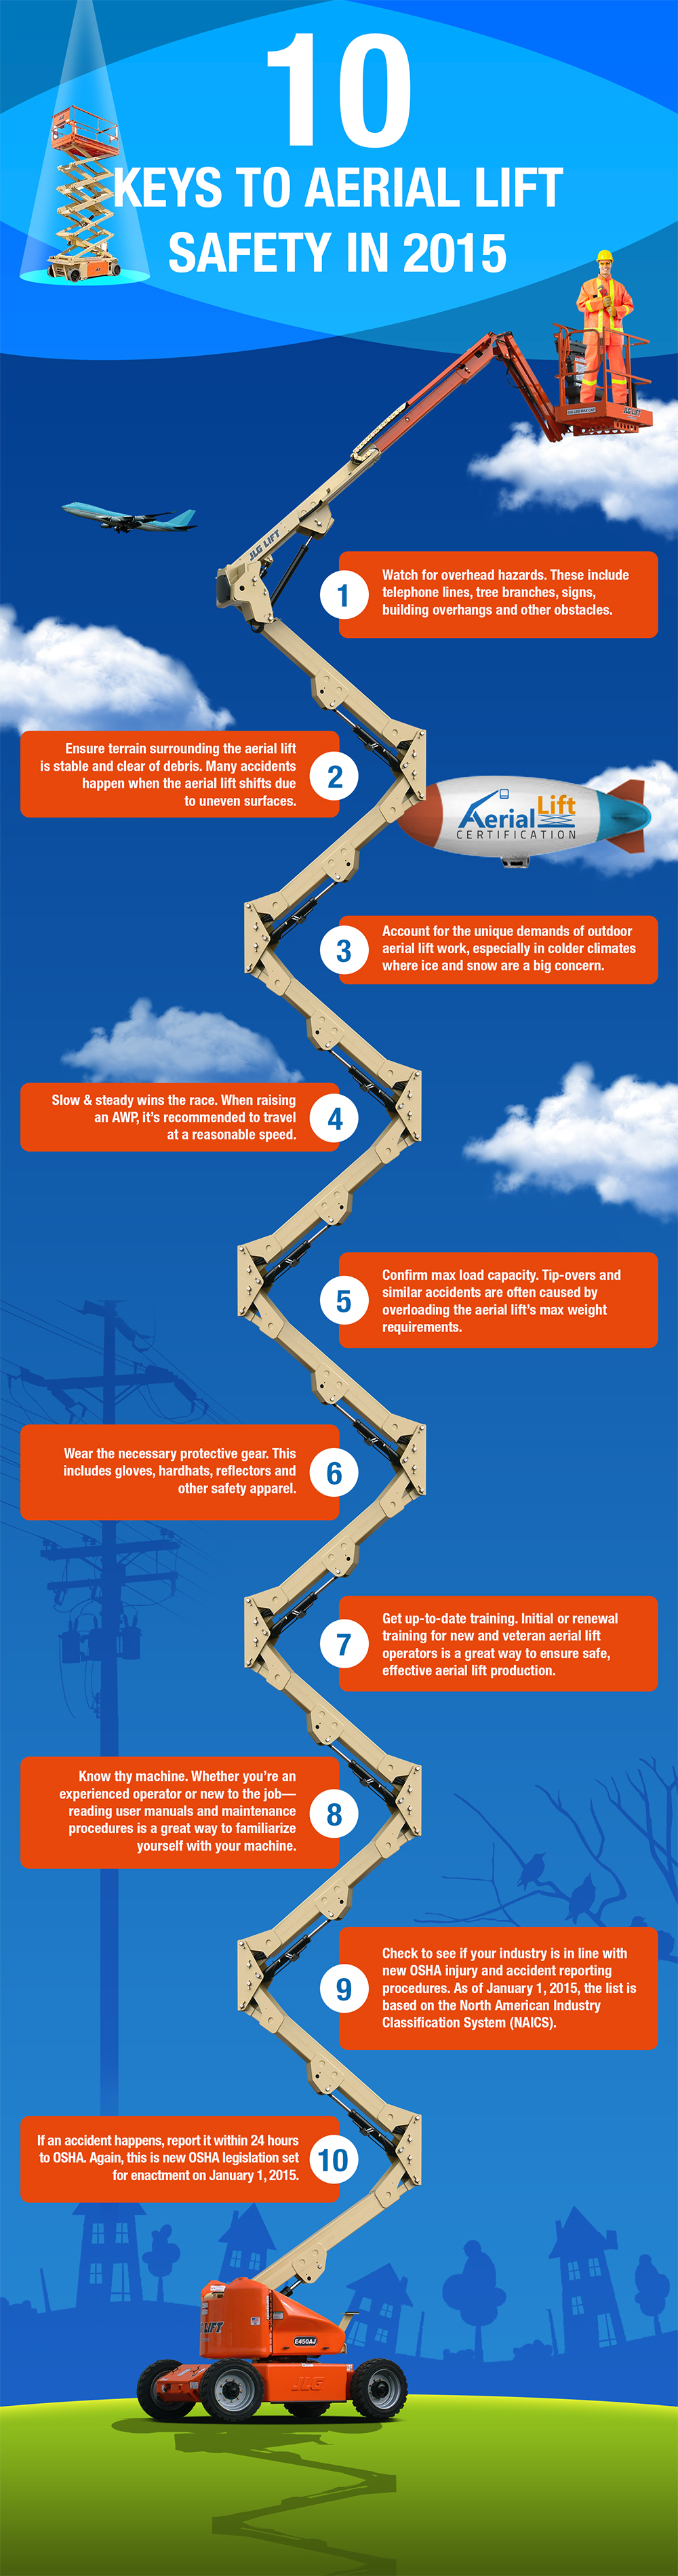 10 Keys to Aerial Lift Safety in 2015